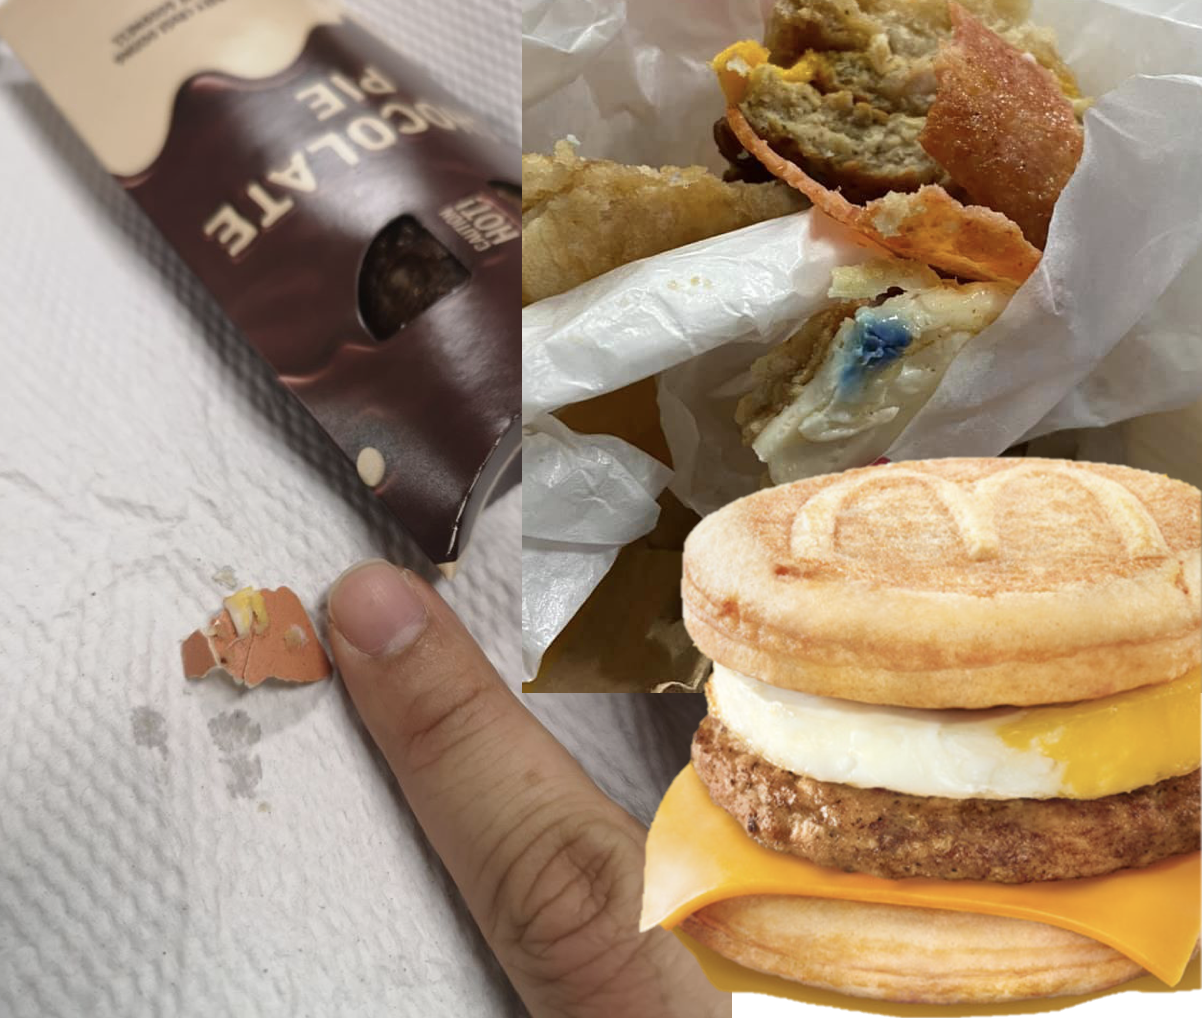 Some customers feel unexpected crunch in McGriddles sandwiches